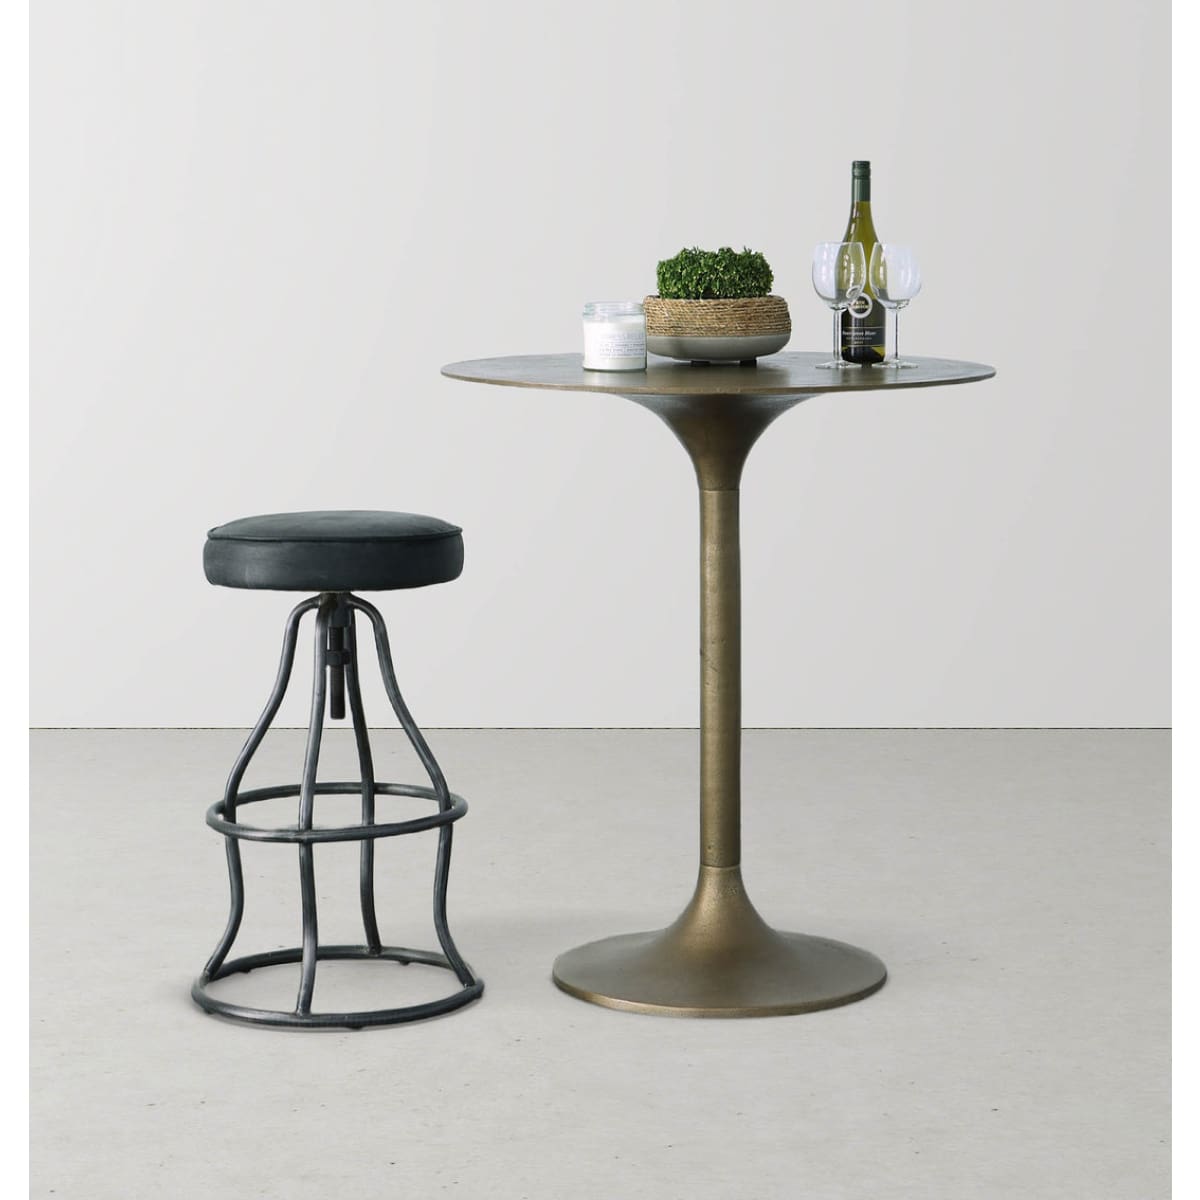 Bowie Bar Stool - Distressed Black Leather - lh-import-stools